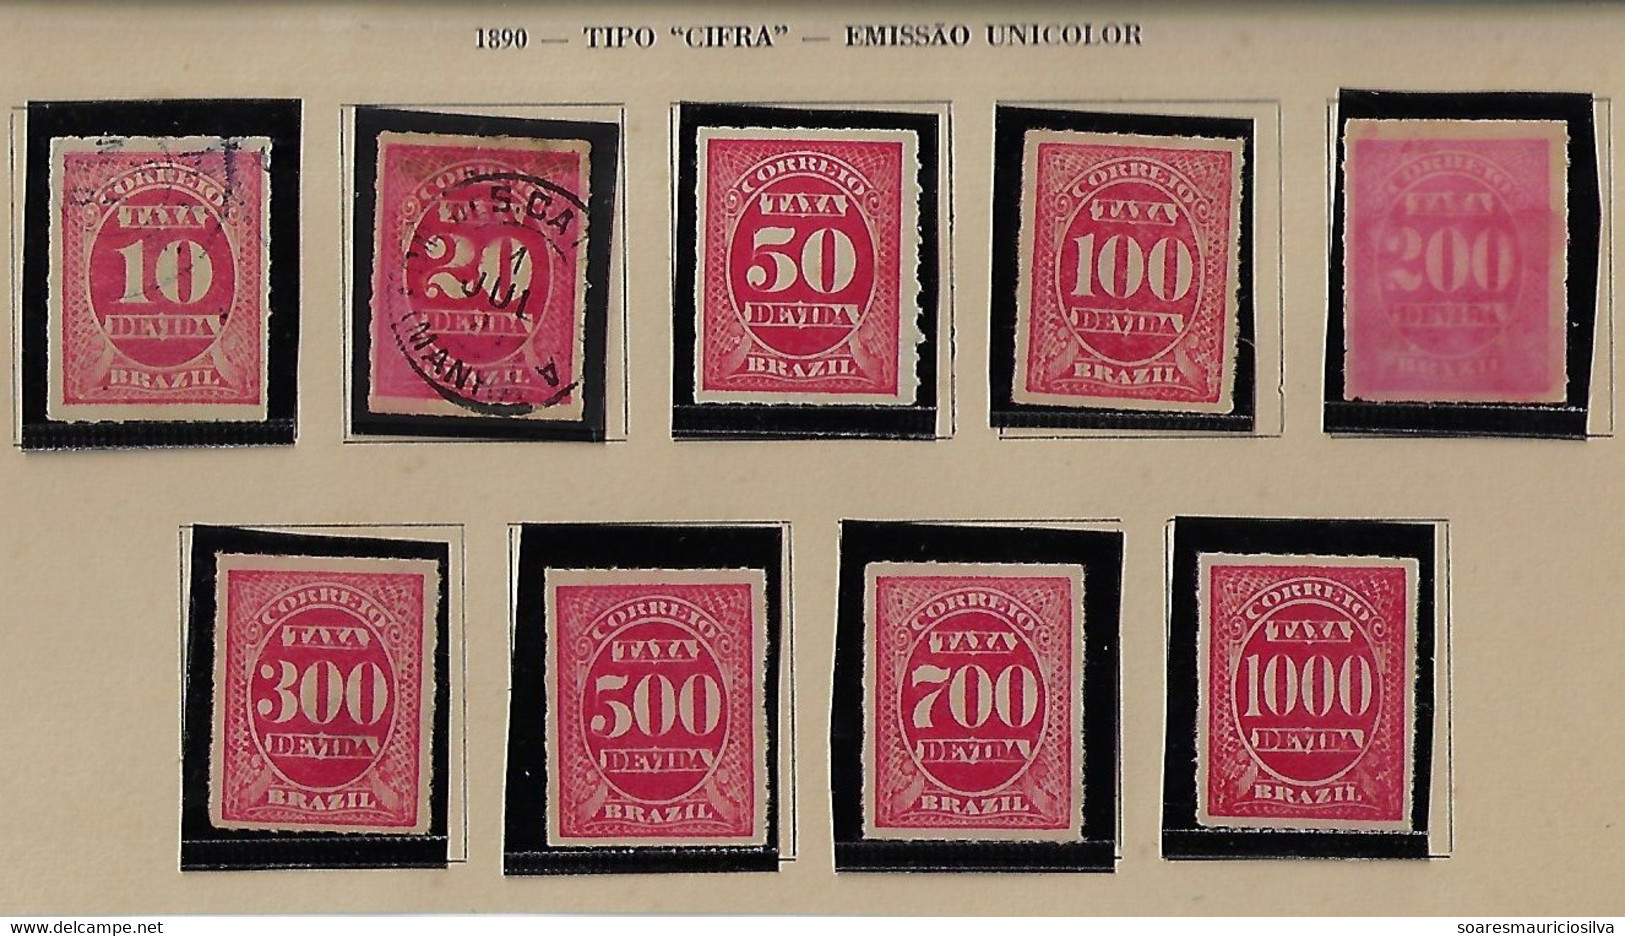 Brazil 1890 Complete Series Postage Due American Bank Note ABN Used And Unused Ink Used In These Stamps Fades In Water - Segnatasse